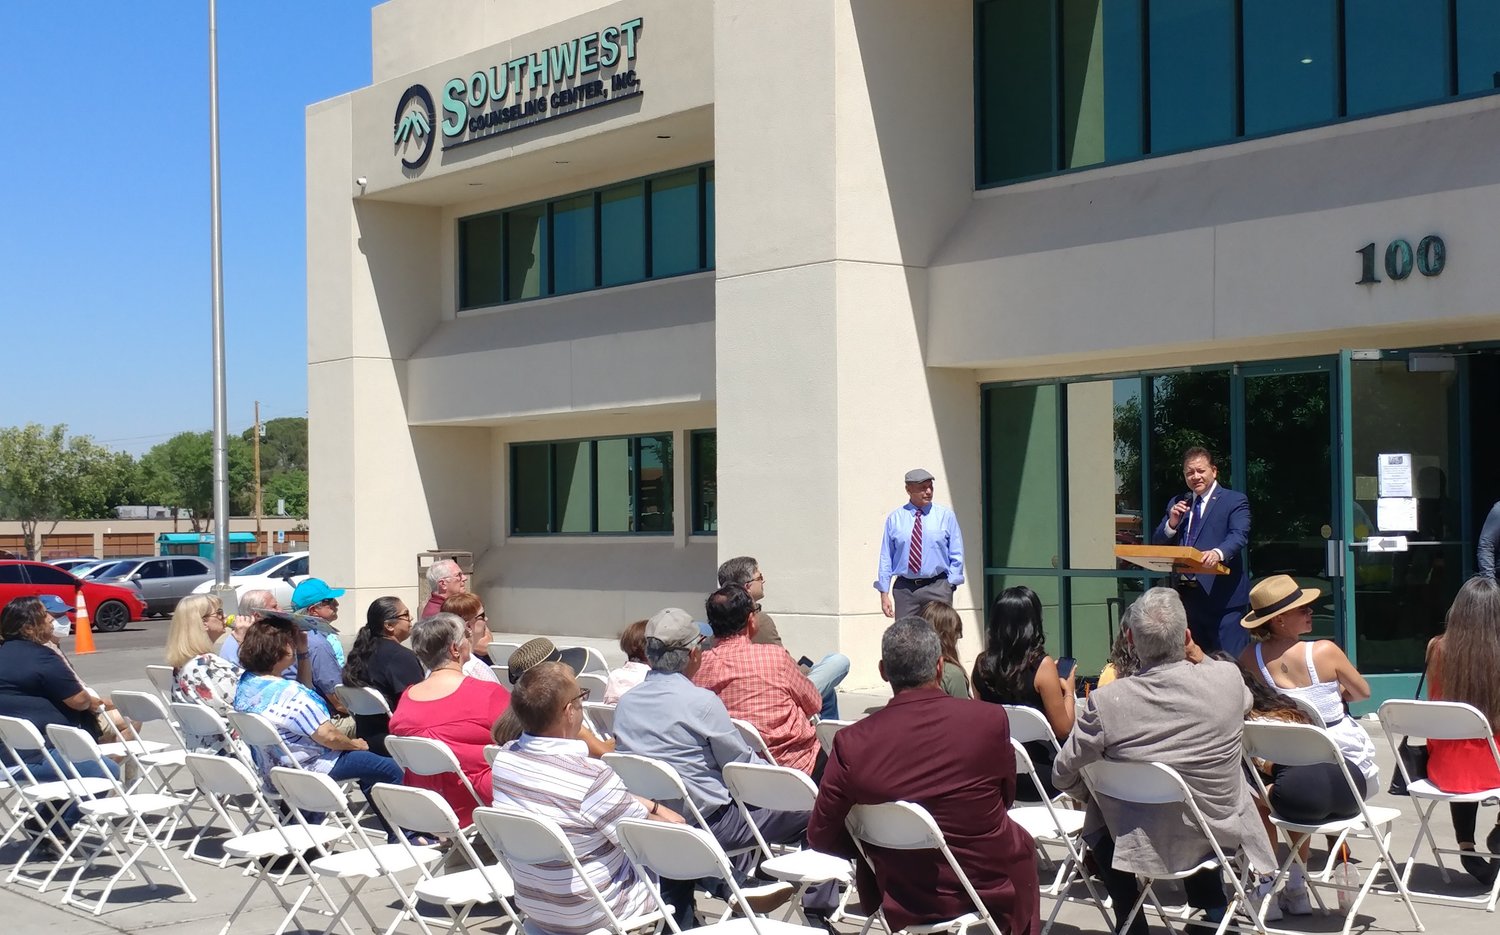 Mayor Ken Miyagishima speaking at the ribbon cutting as Genoa Healthcare opened a pharmacy inside Southwest Counseling Center at 100 W. Griggs Ave. in Downtown Las Cruces. Standing at the mayor’s right is Southwest Counseling Center CEO Roque Garcia.